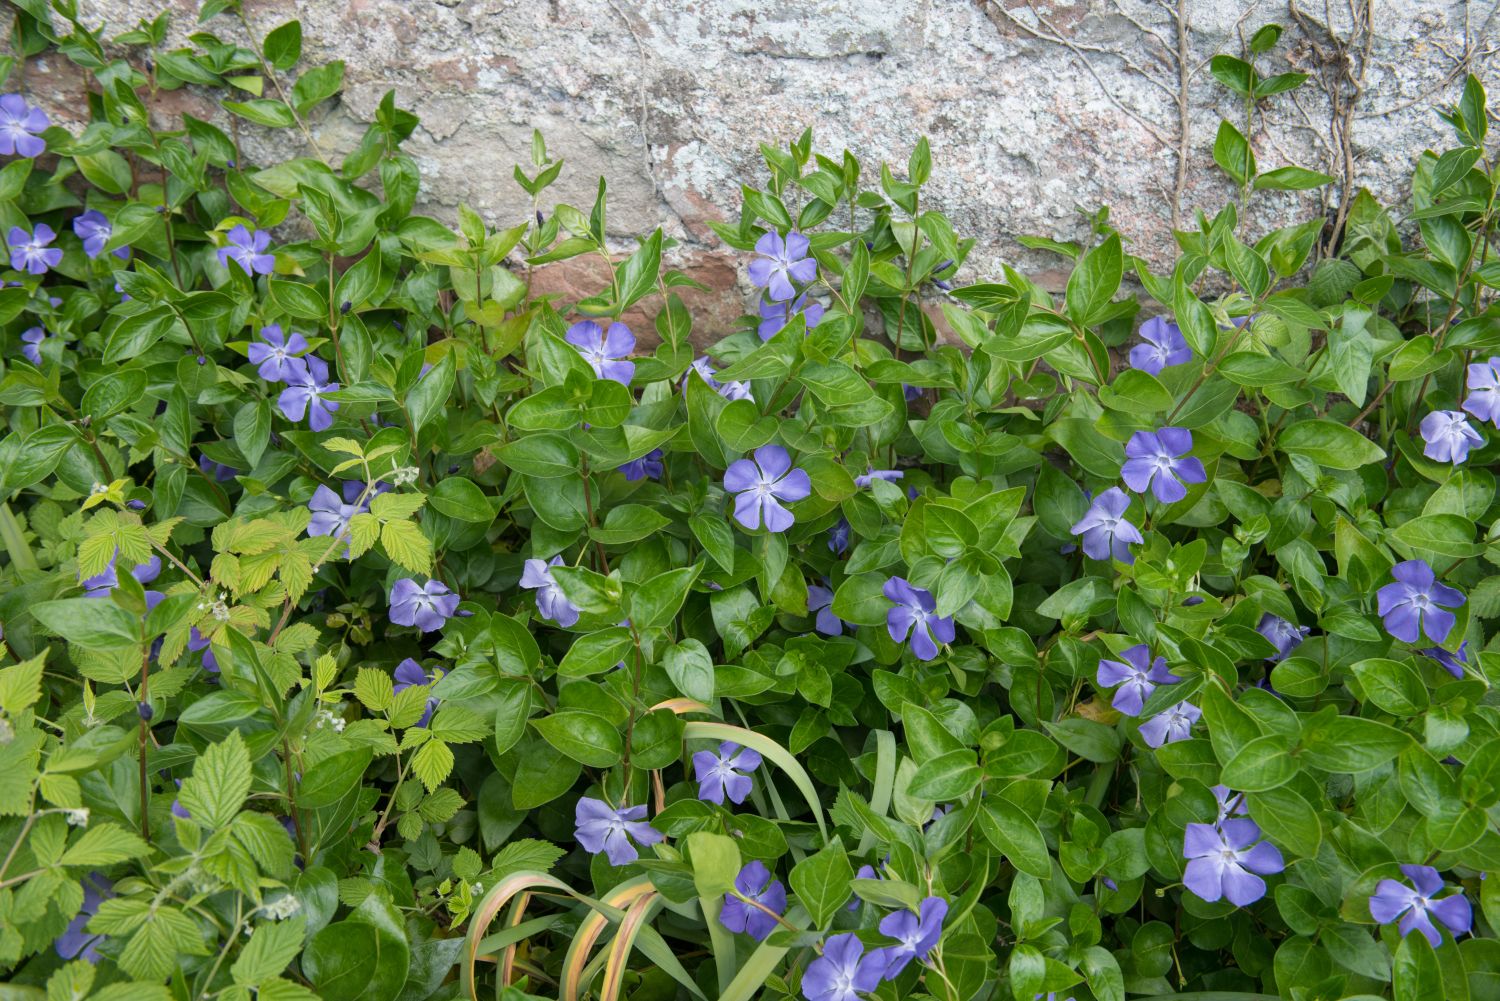 Lesser periwinkle along a wall